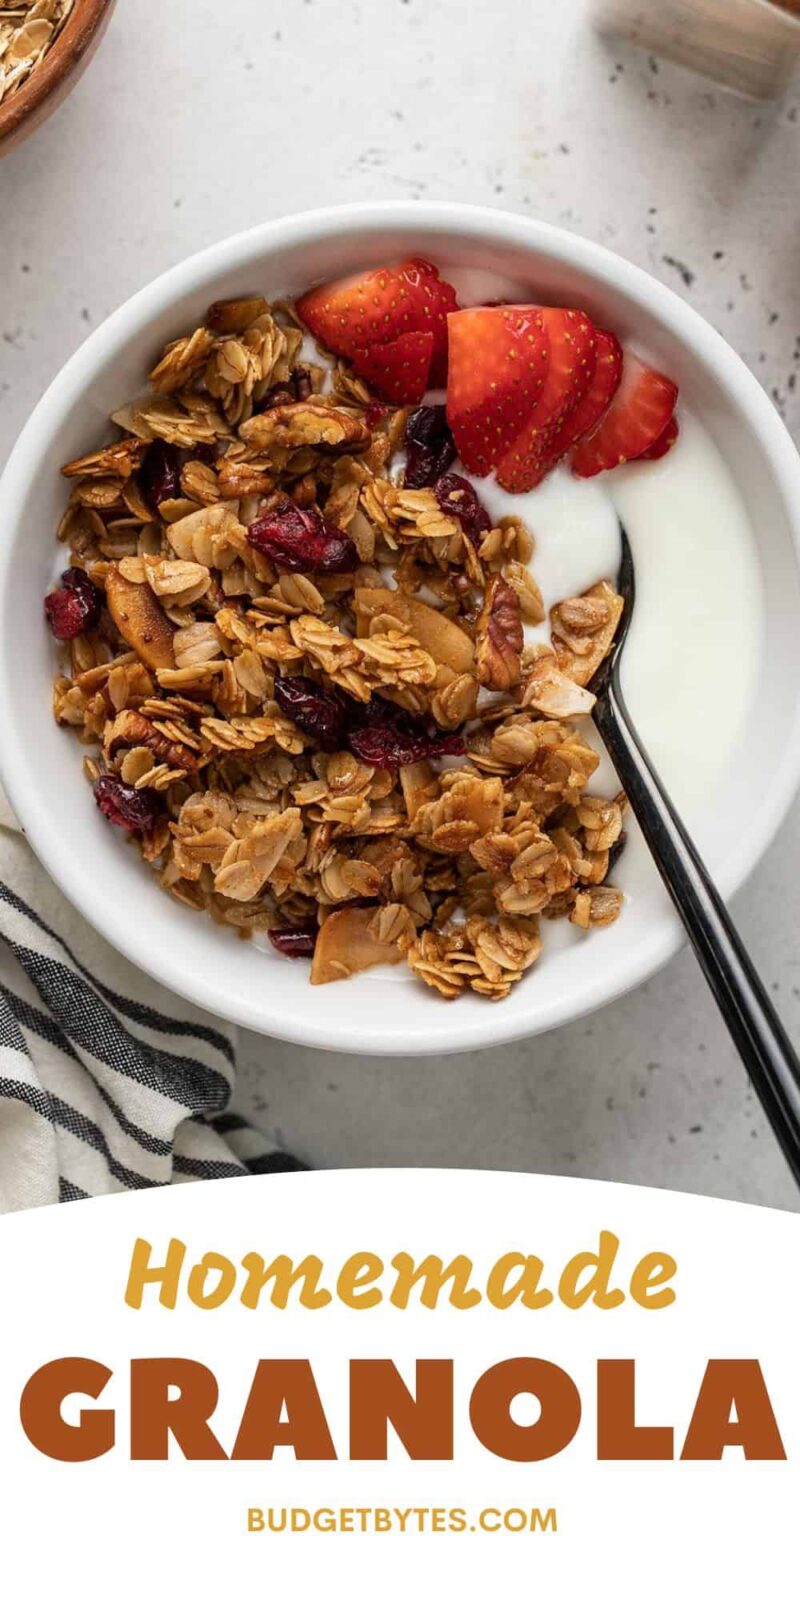 Overhead view of a bowl of yogurt topped with granola and strawberries.